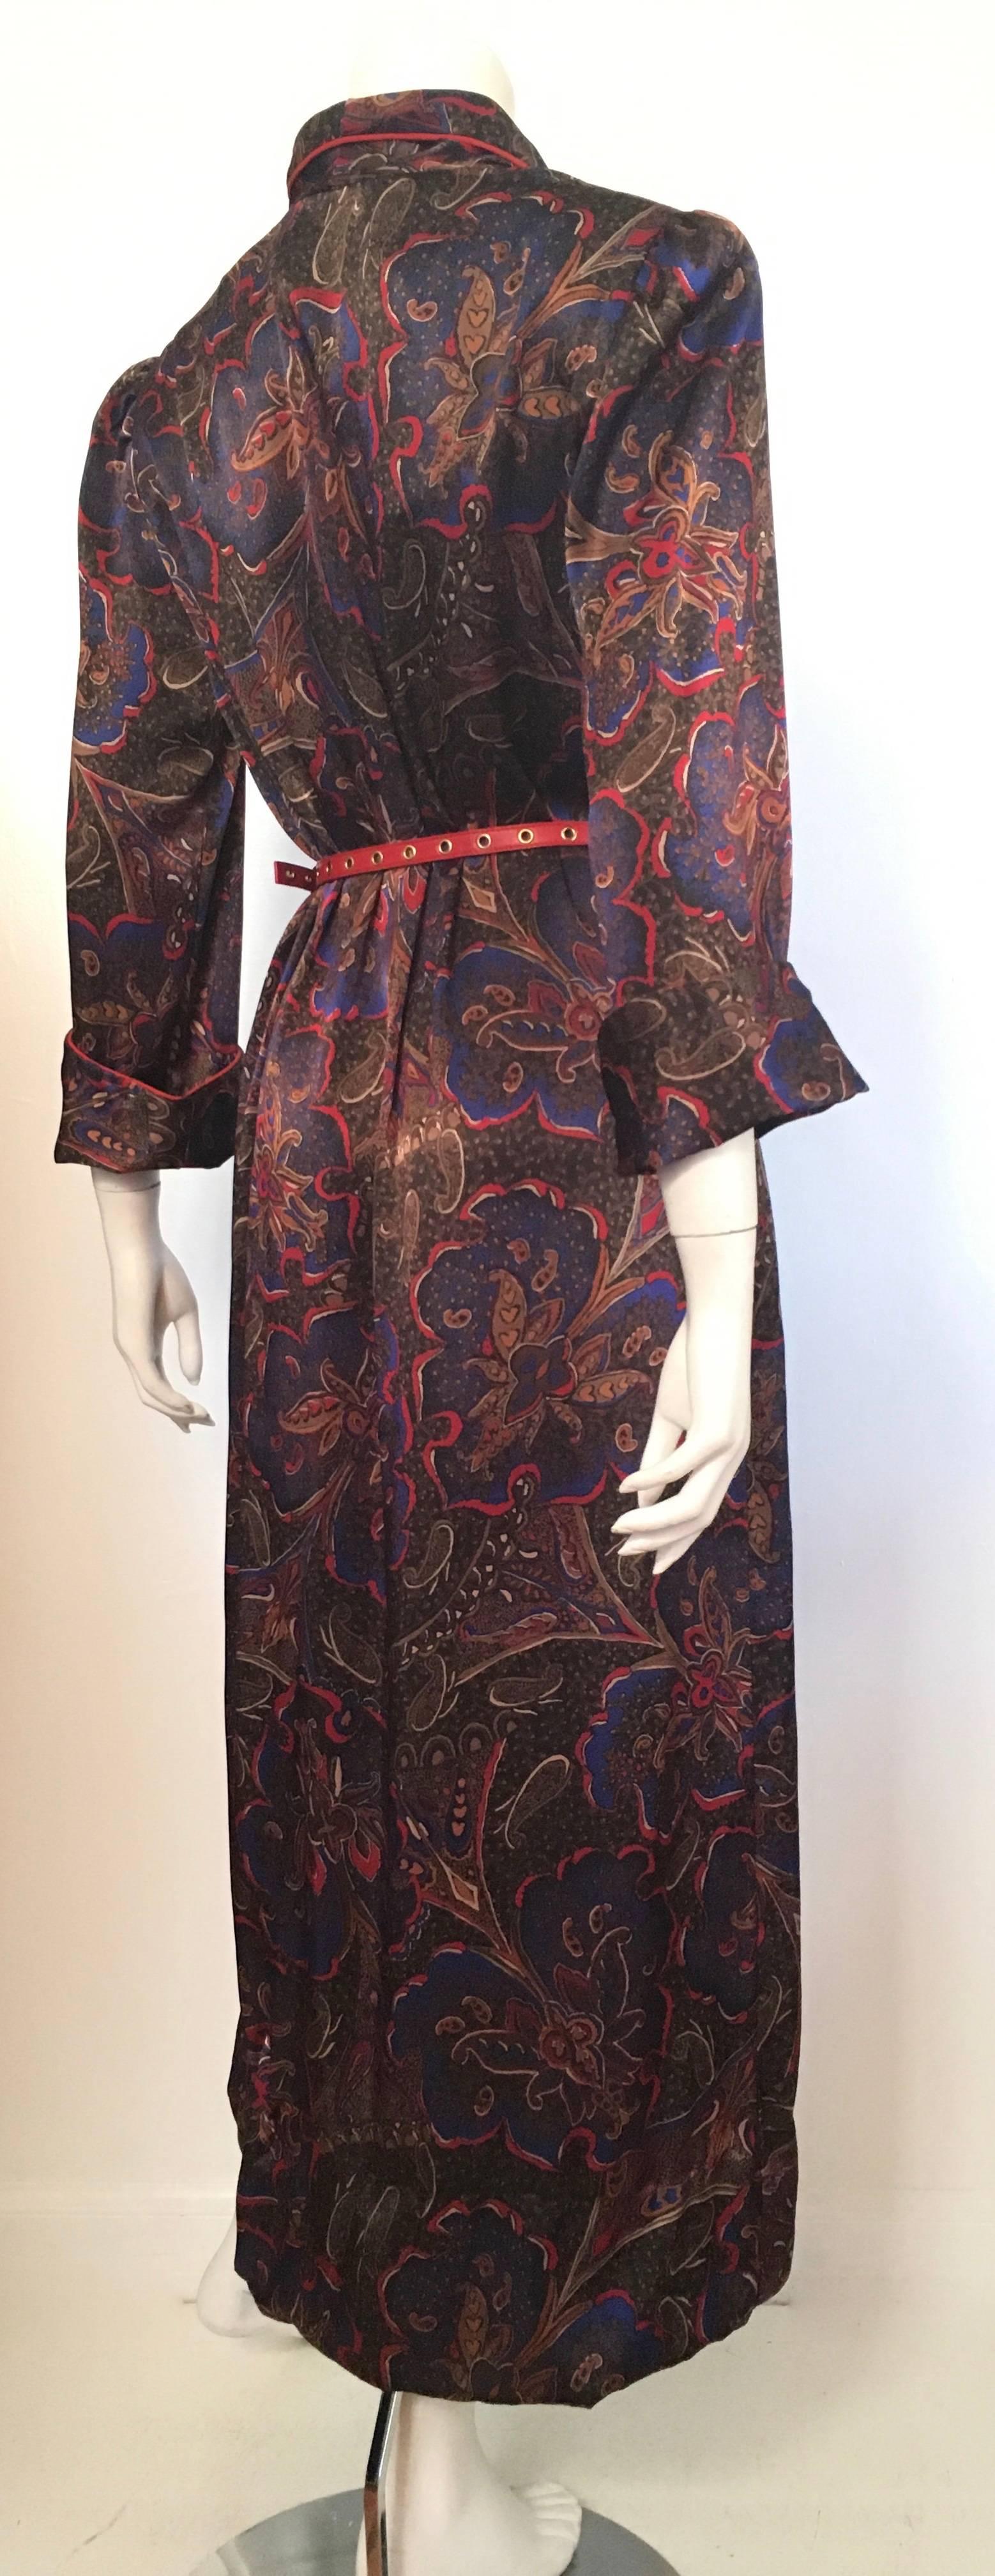 Women's or Men's Bill Blass for Neiman Marcus 1980s Paisley Wrap Dress with Pockets Size Medium. For Sale